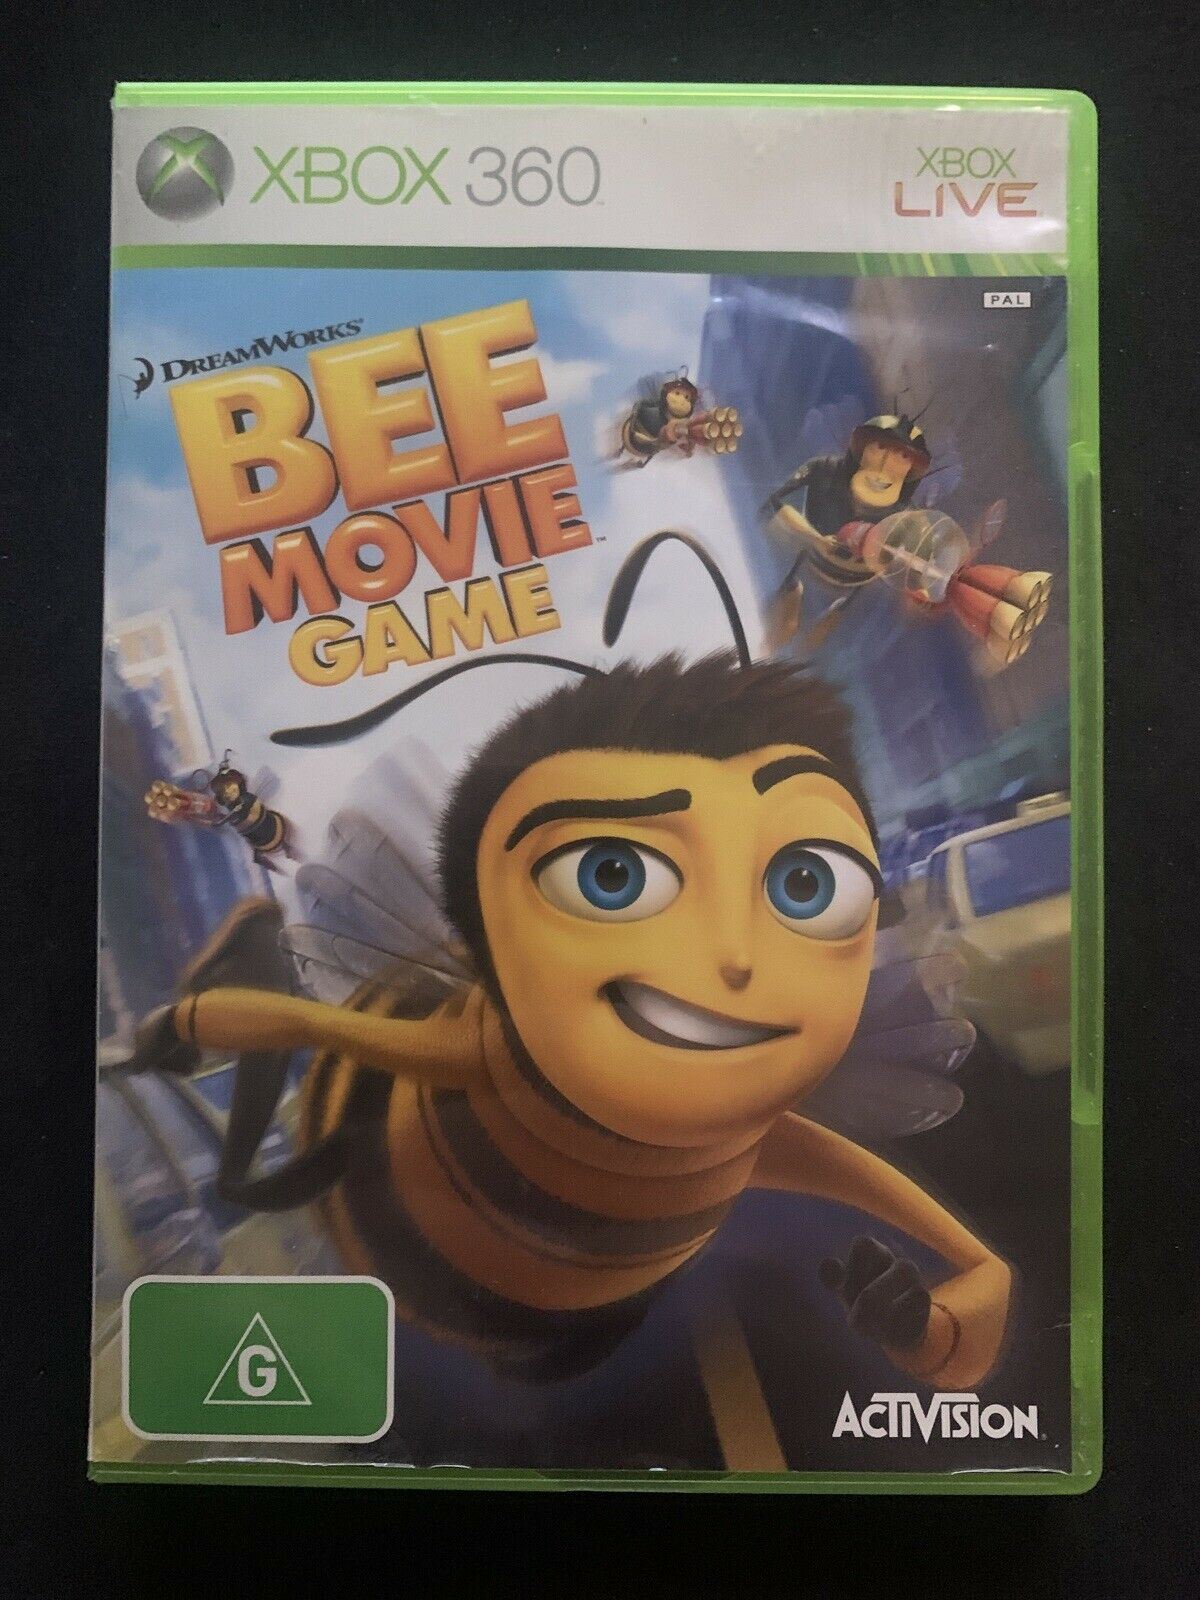 DreamWorks Bee Movie Game - Microsoft Xbox 360 with Manual